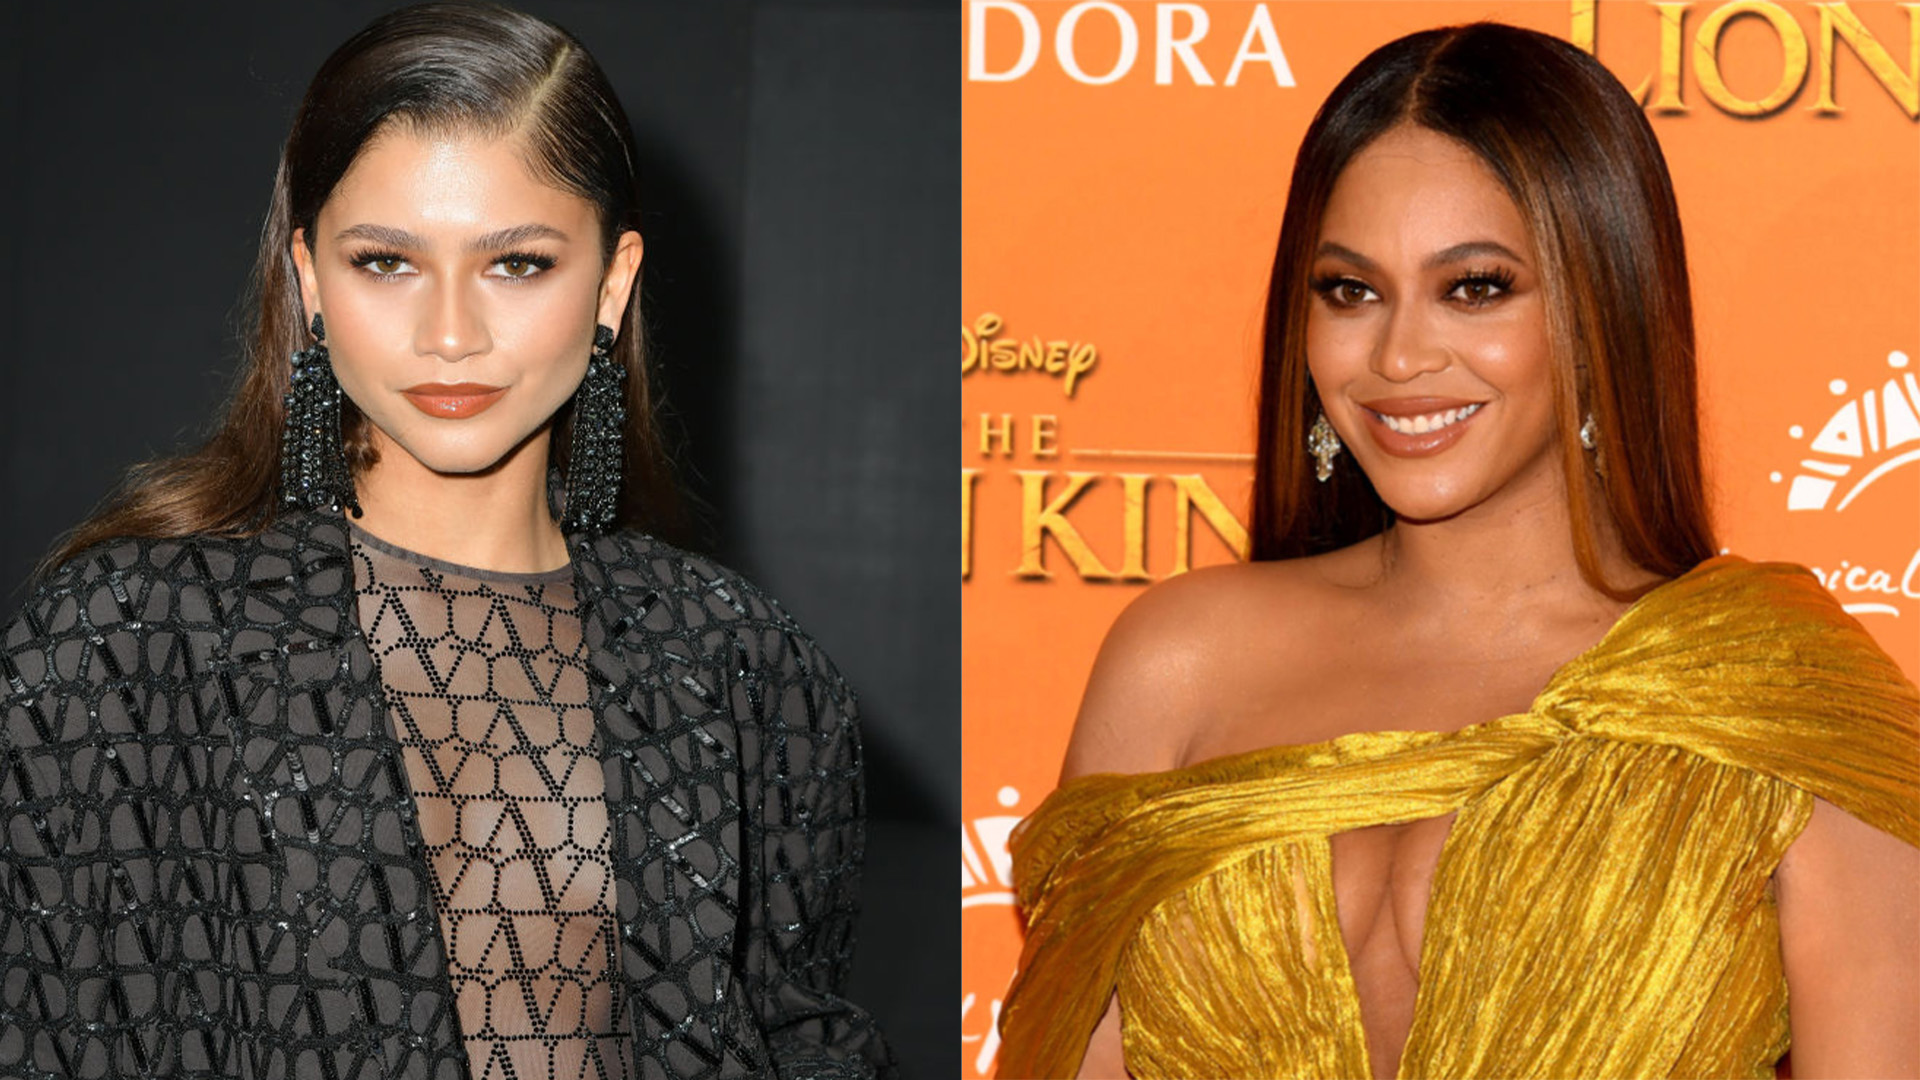 Zendaya And Beyoncé Ranked As Top Black Influencers Raking In A Social Media Valuation Of Millions, Report Says